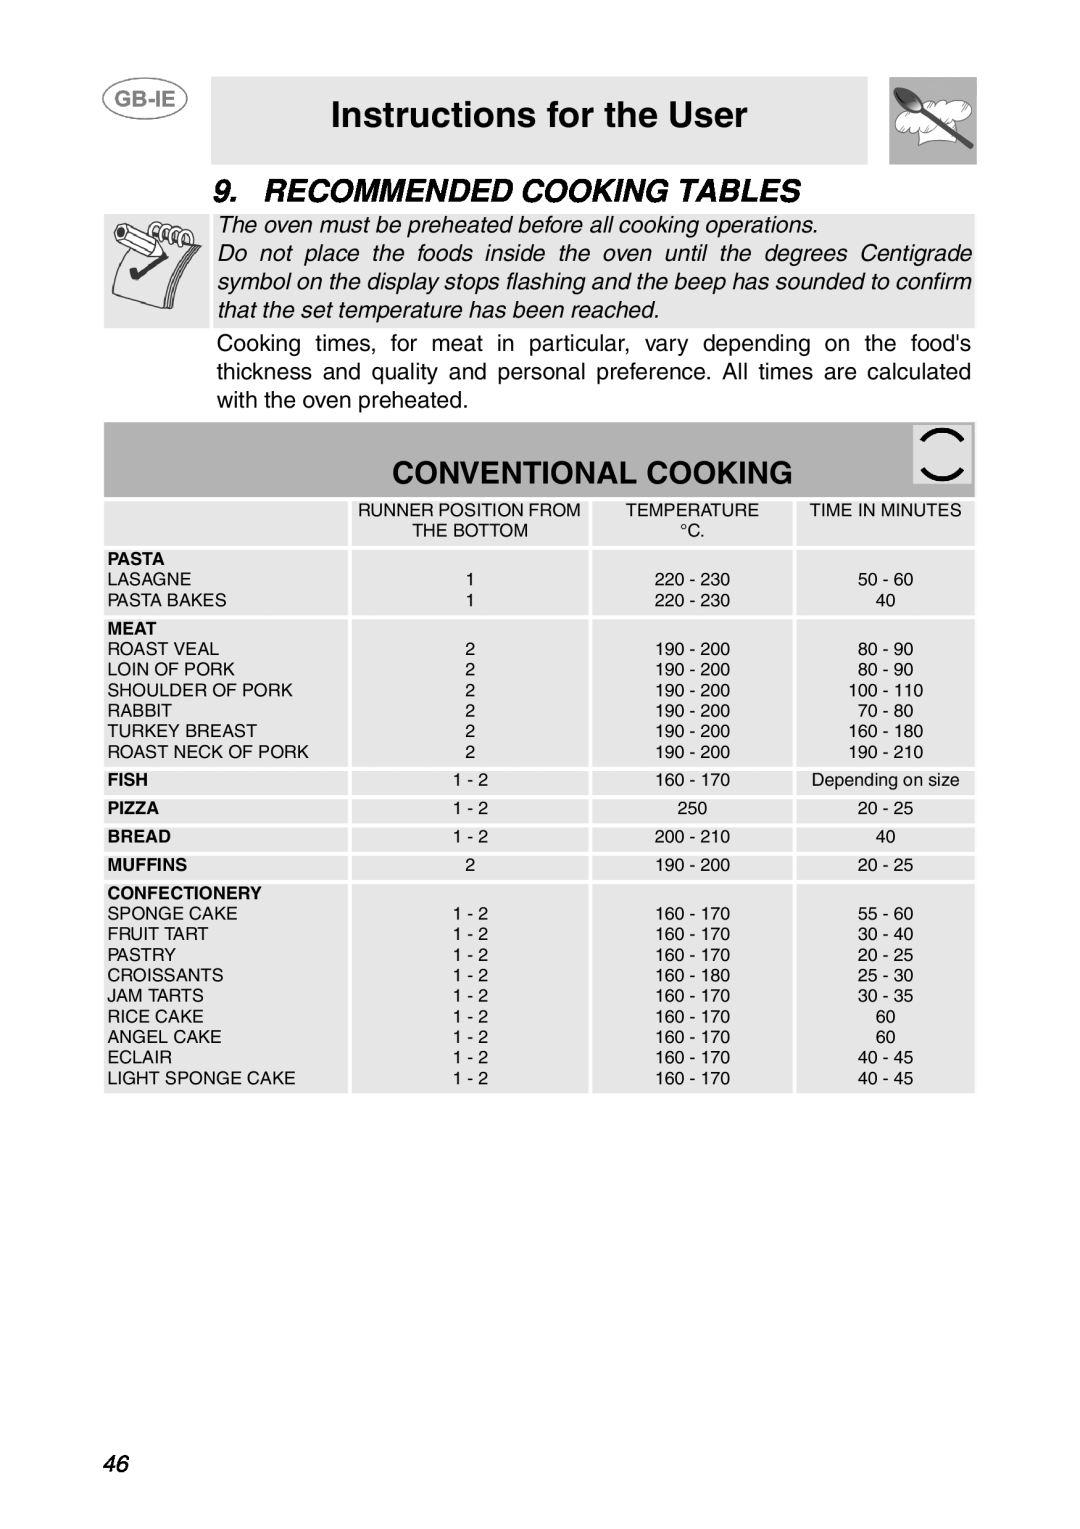 Smeg SCP107AL Recommended Cooking Tables, Conventional Cooking, Instructions for the User, Pasta, Meat, Fish, Pizza, Bread 